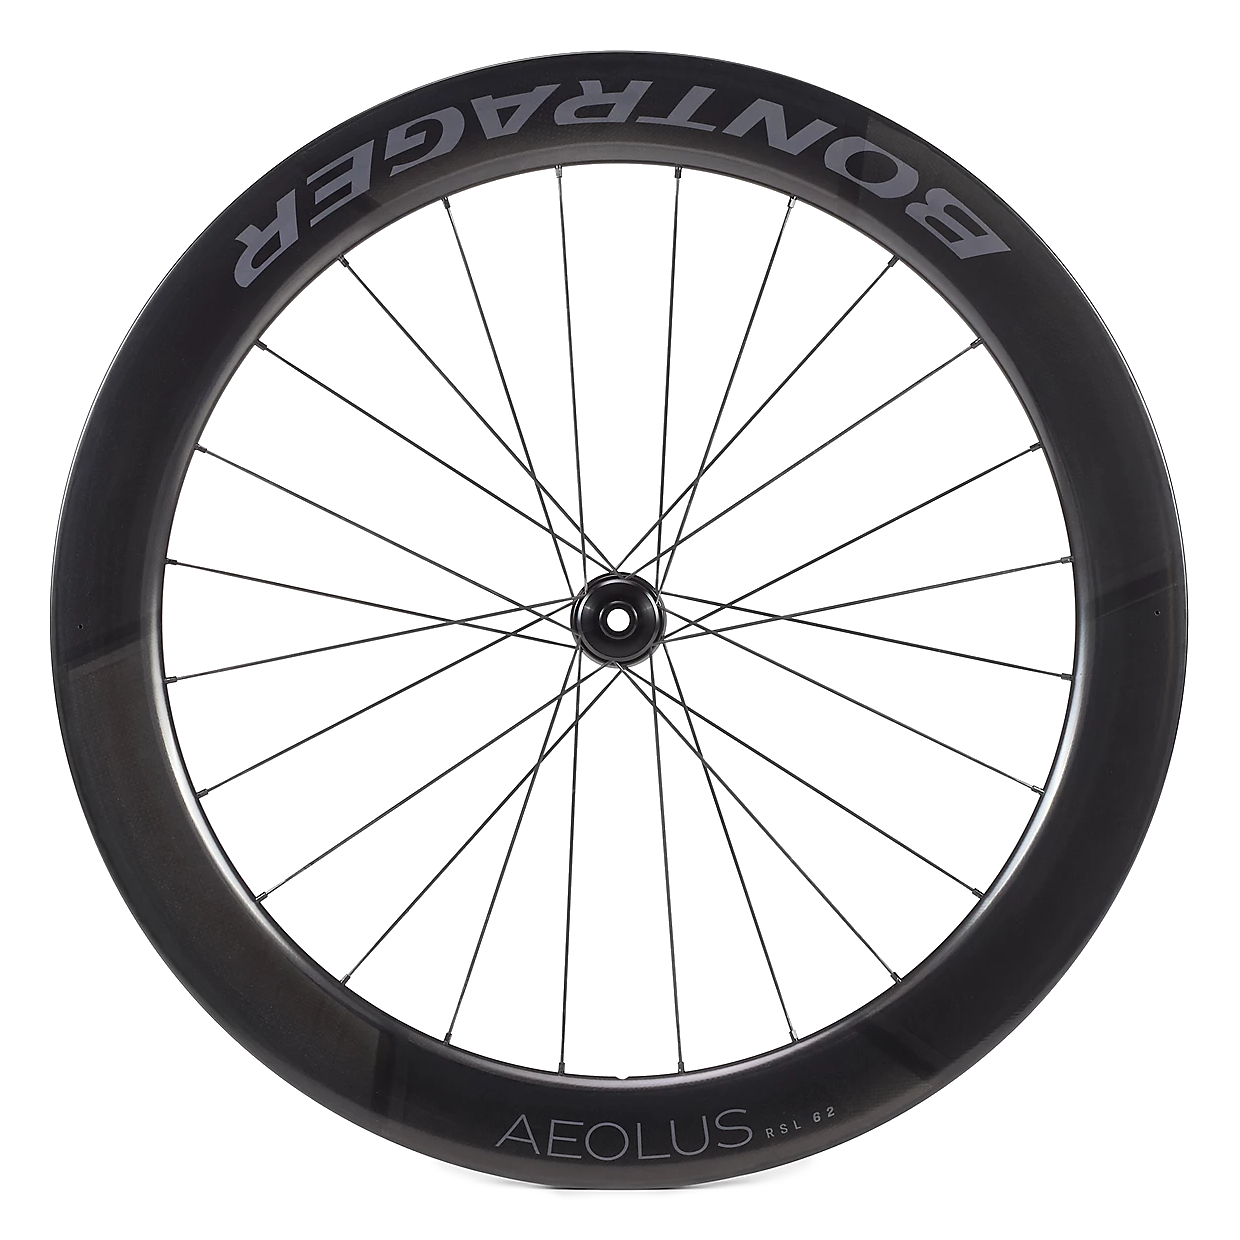 Picture of Bontrager Aeolus RSL 62 TLR Disc Carbon Front Wheel - Clincher / Tubeless - Centerlock - 12x100mm